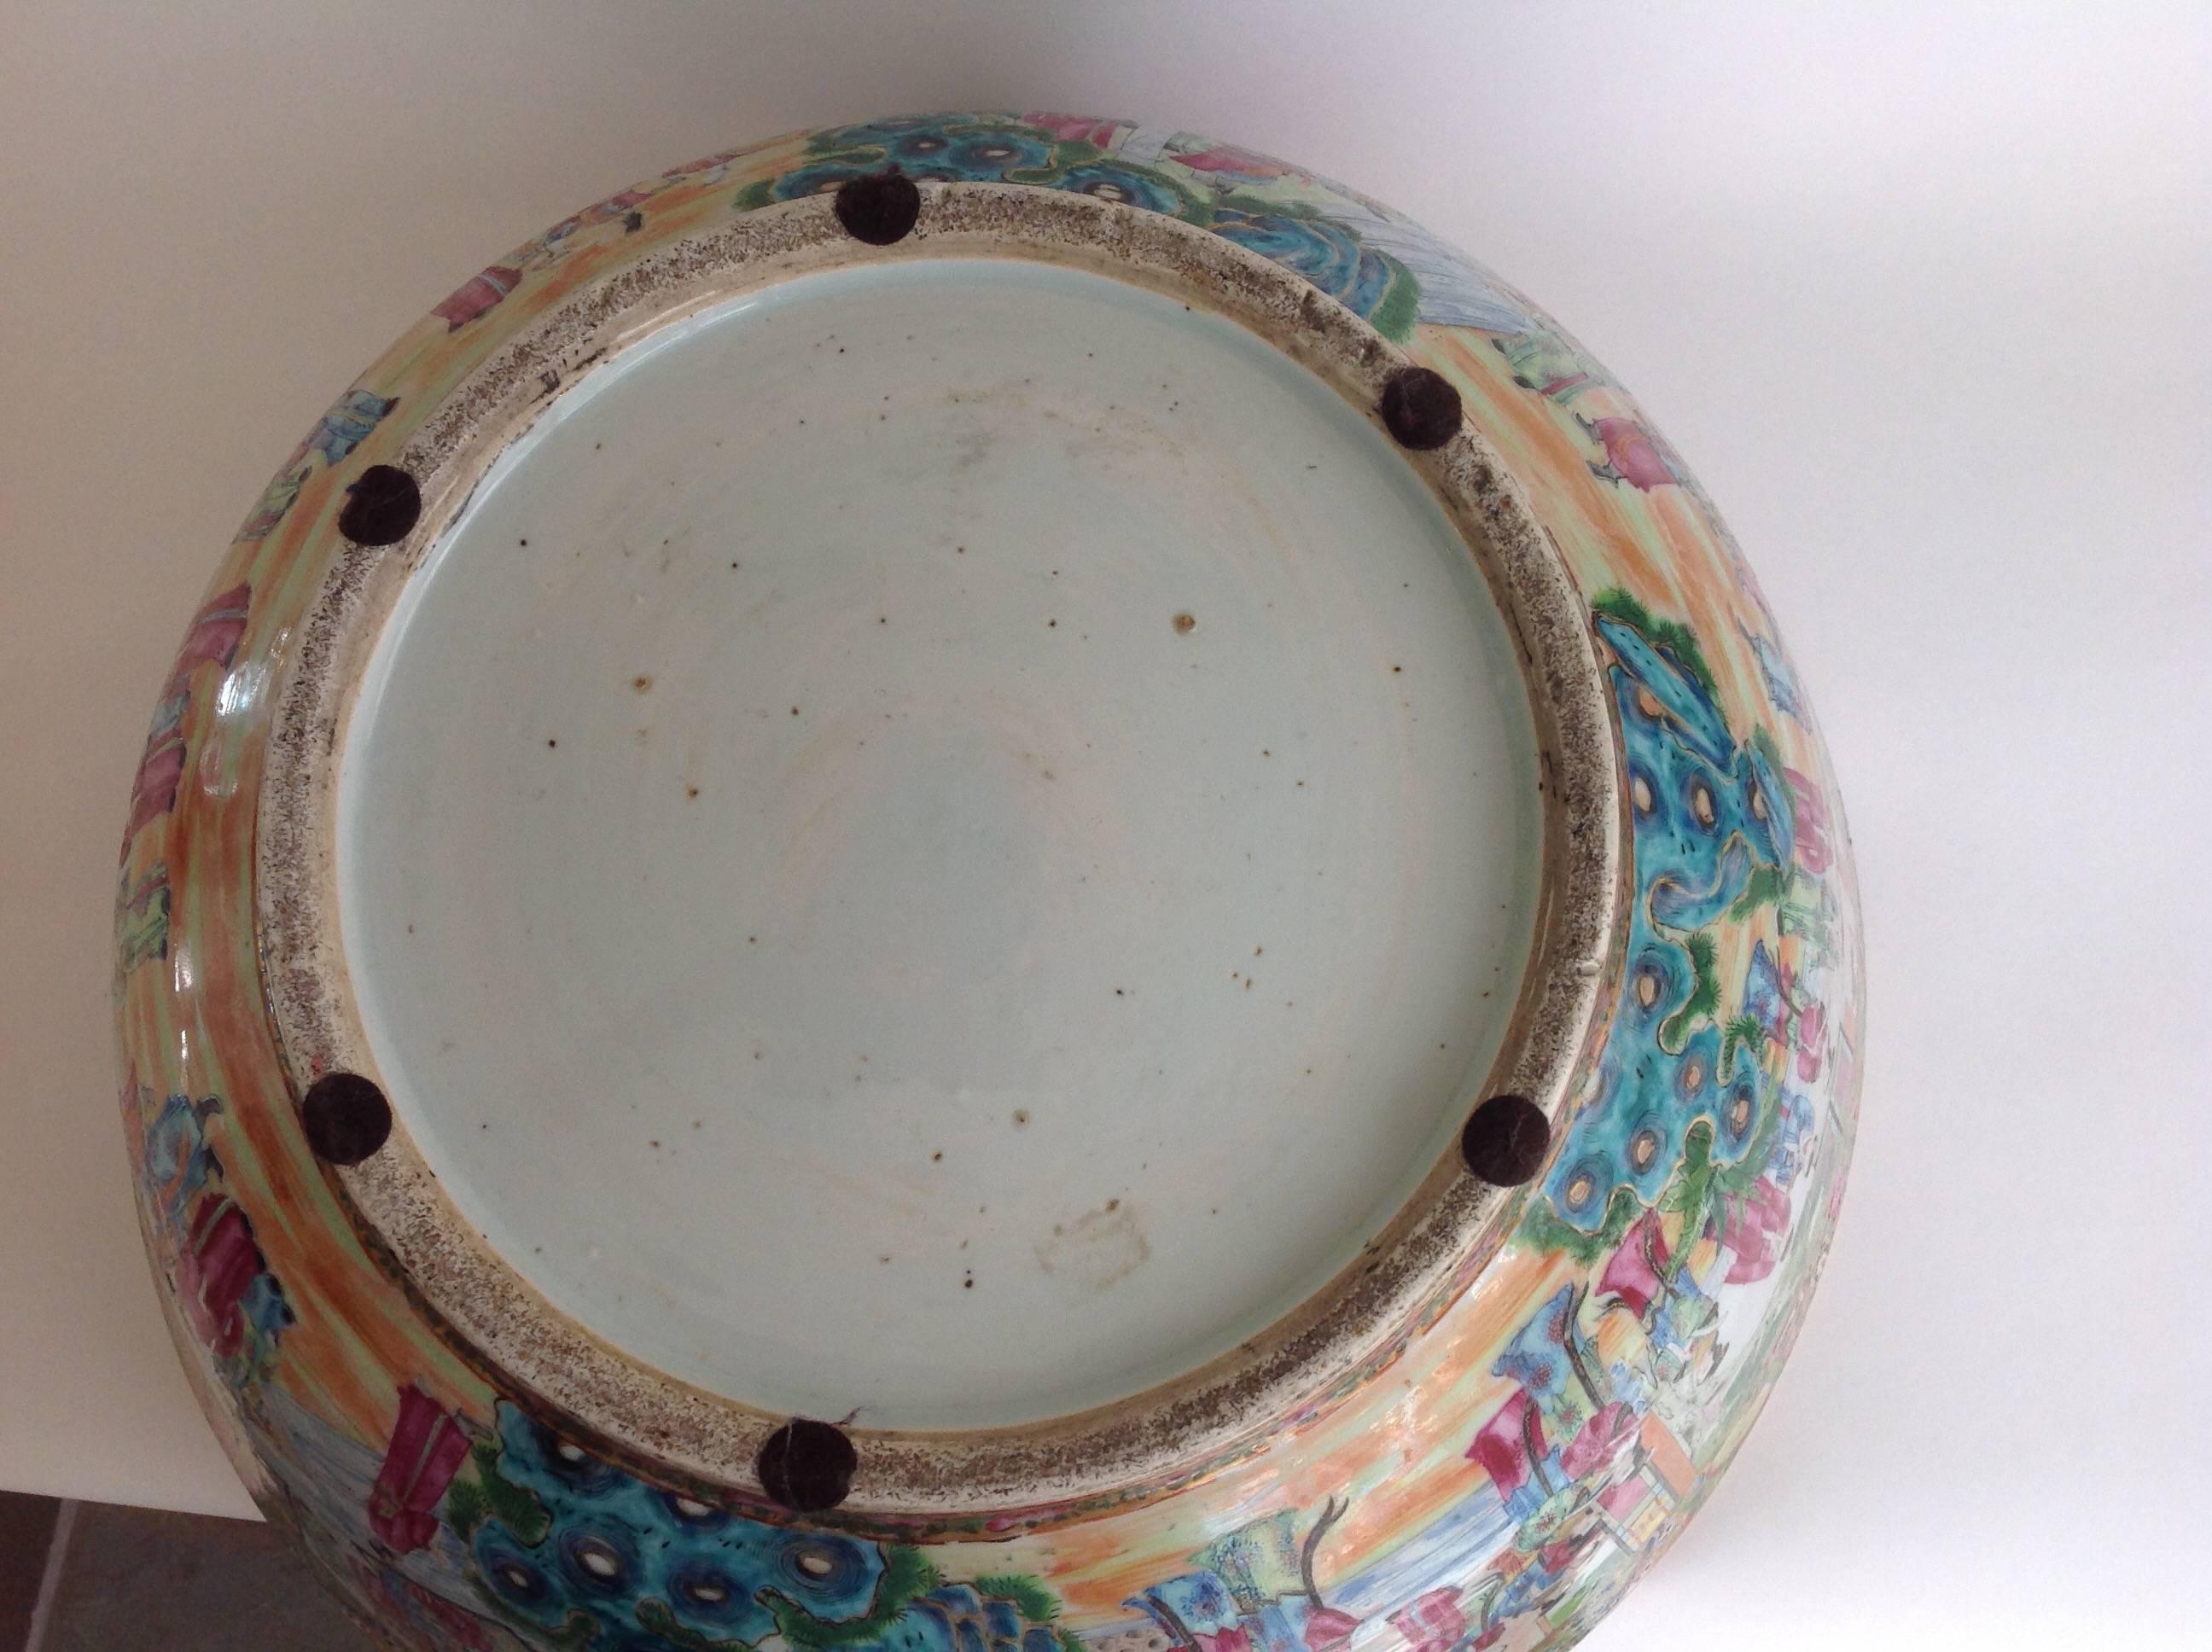 Fine example of a Qing dynasty rose medallion punch bowl, with scenes of 